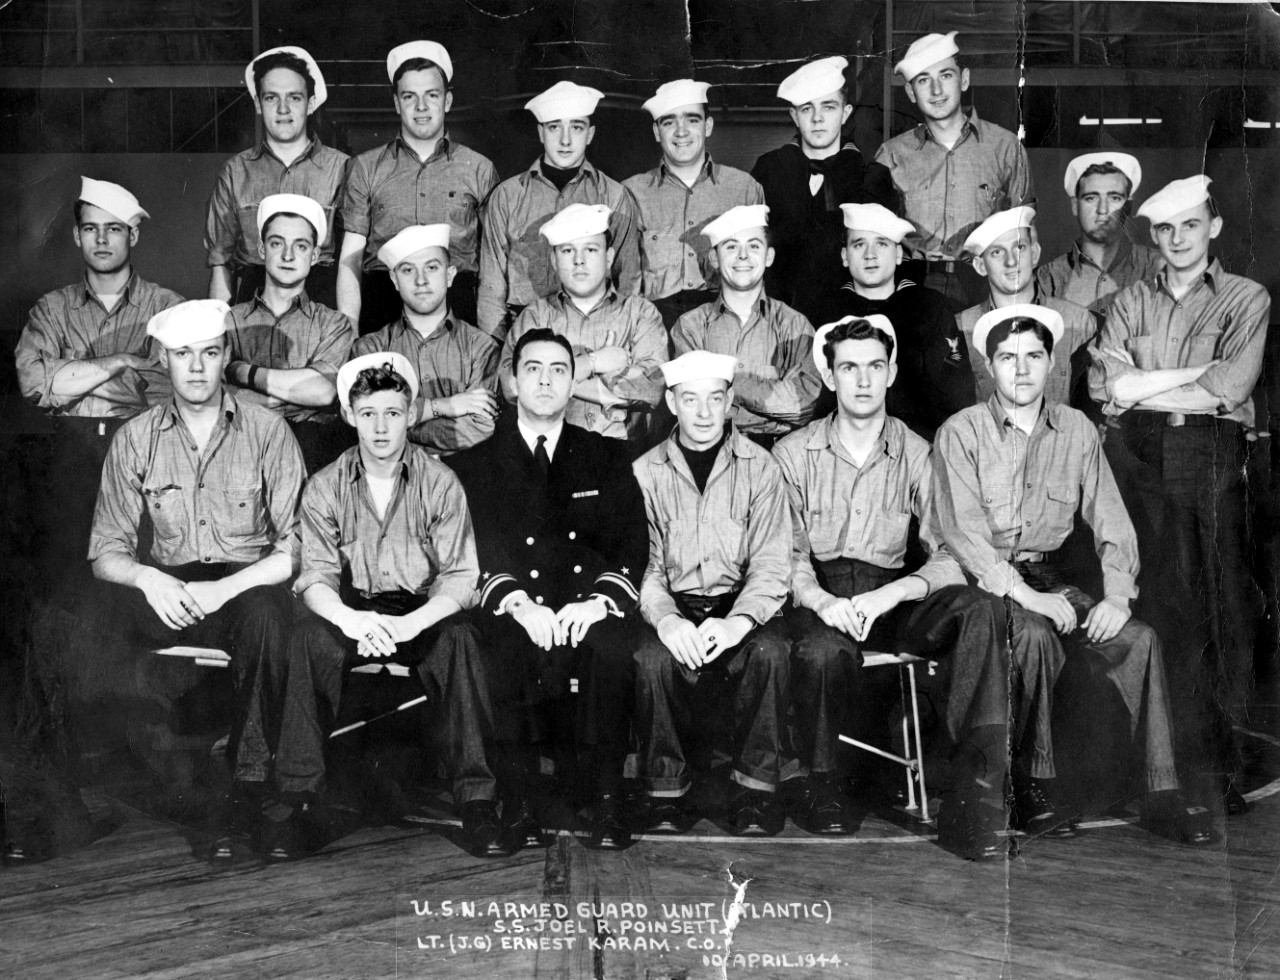 Collection of 19 photos and one telegraph related to the naval service (1941-1963) of James J. Stephens. Images include WWII era photos of Stephens with buddies/pals in a bar and posed portraits, as well as his later service posted at Naval Station Newport, RI. Photos at Naval Station Newport, RI (1957-1959) consist of general views of docked ships, USS Norris (DD-859), and onboard USS Pillsbury (DD-227). The most significant image in the collection is a large group photo of the crewmembers of the SS Joel R. Poinsett (USN Armed Guard Unit – Atlantic) dated April 10, 1944 – after she spilt in two during a storm on March 4, 1944. She broke in two during a storm 400 miles off the coasts of Nova Scotia and Newfoundland. All of the crew managed to escape with no deaths or injuries. A telegram dated February 17, 1944 sent from Stephens reads: “All well and safe. Please don’t worry. All my love”